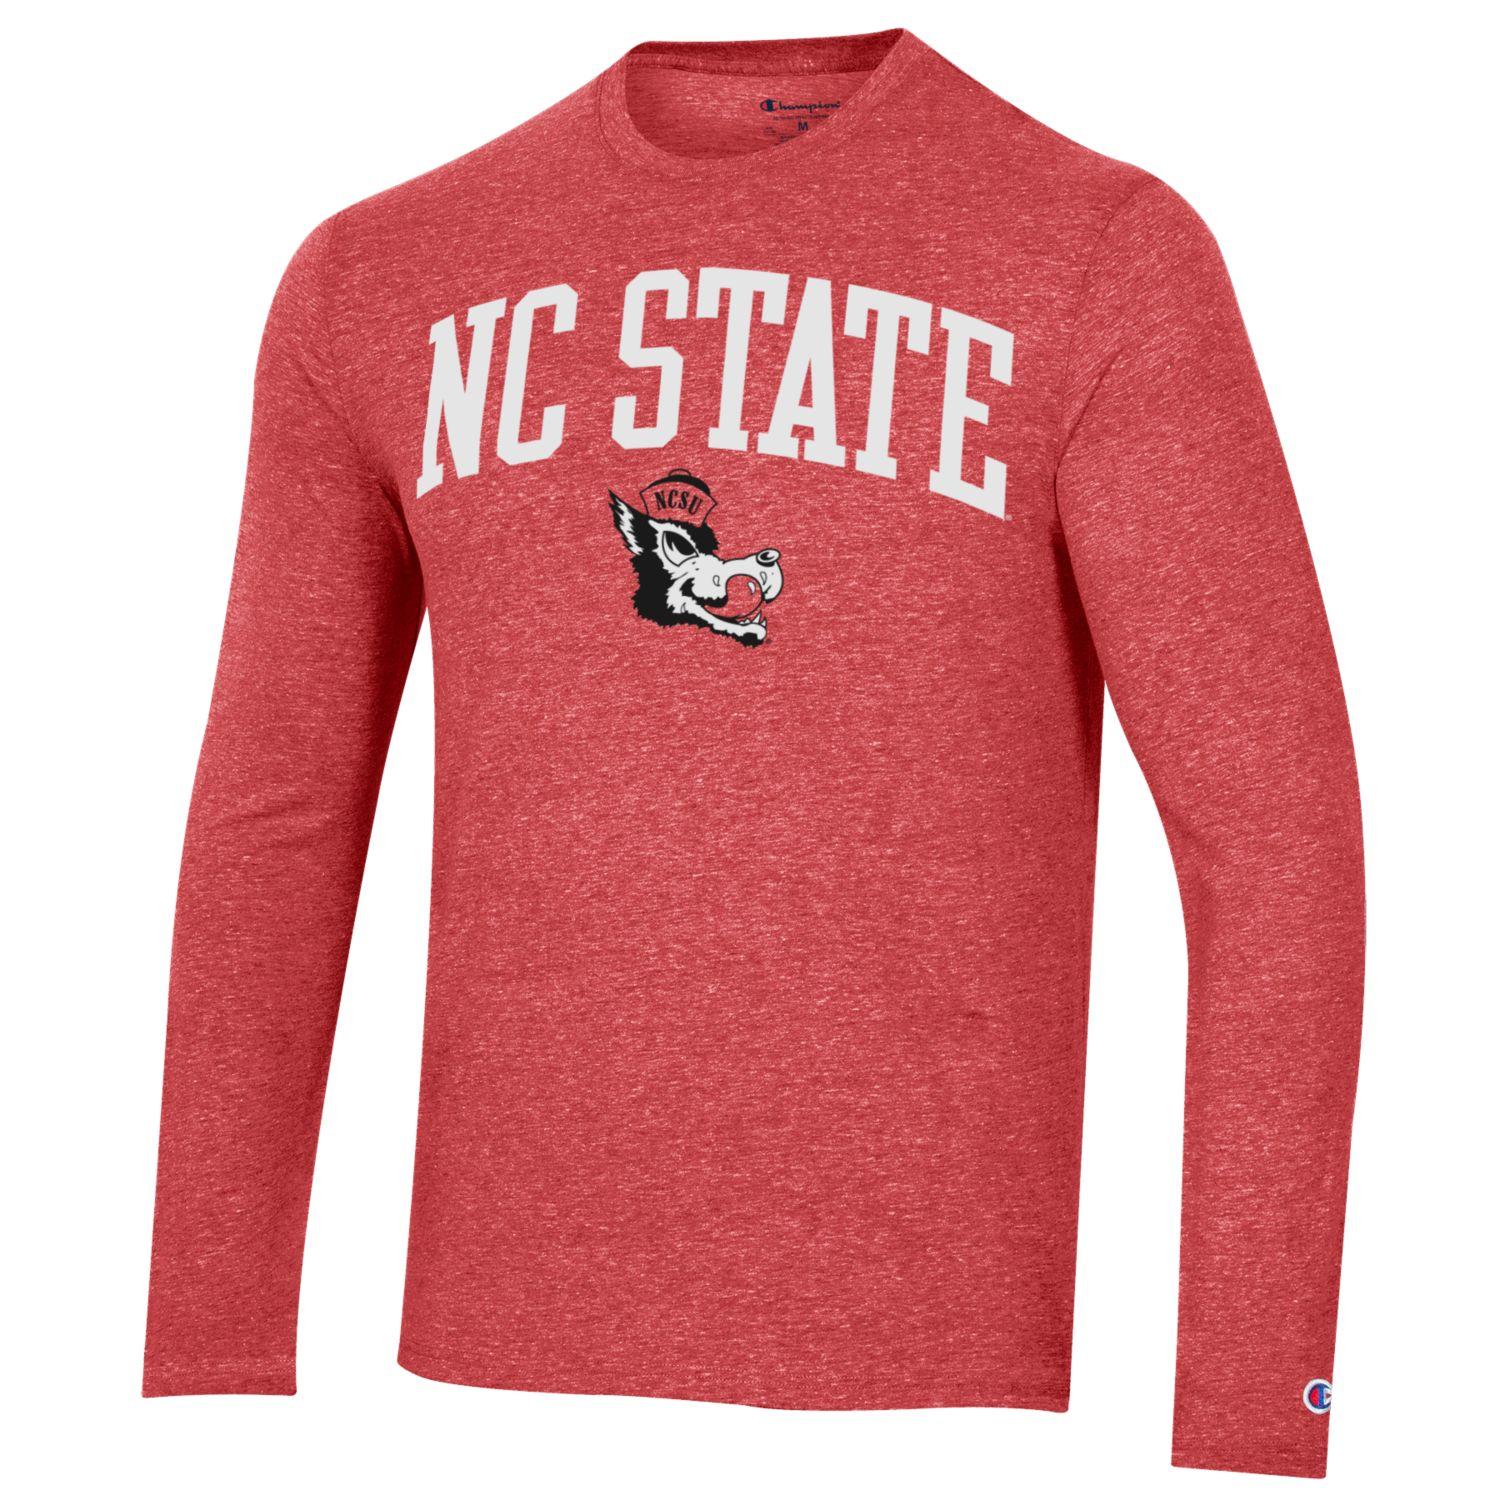 NC State Wolfpack Champion Red Triumph Slobbering Wolf Long Sleeve T-Shirt